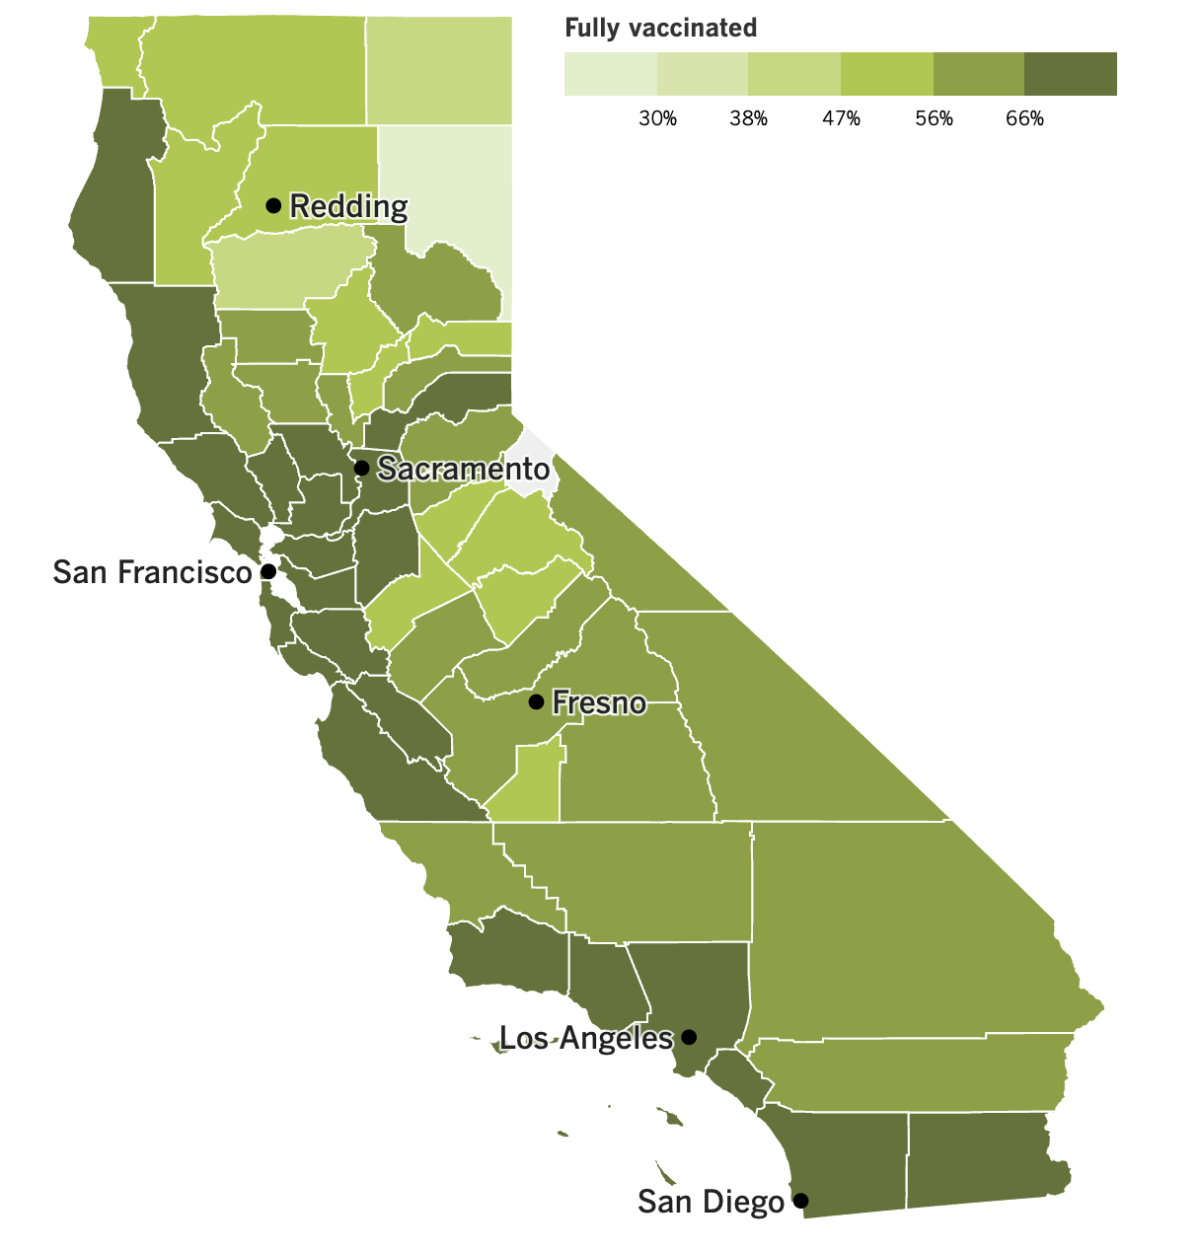 A map showing California's COVID-19 vaccination progress by county as of Feb. 21, 2023.